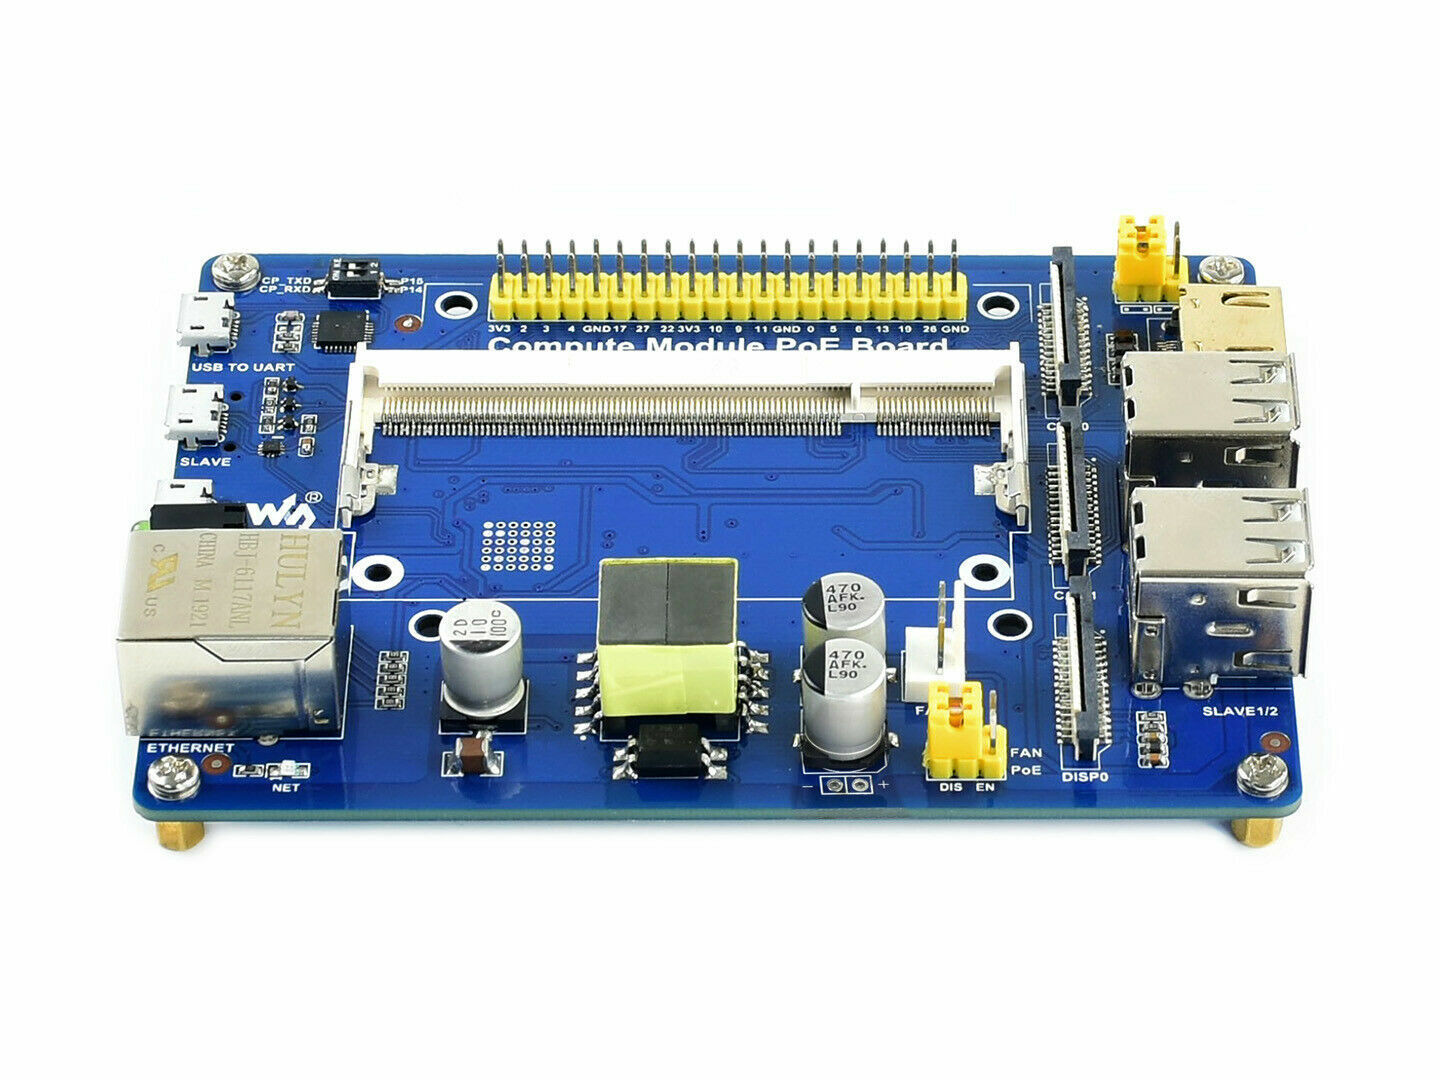 Waveshare Compute Module IO Board with PoE Composite Breakout Board Raspberry Pi. Available Now for 59.99